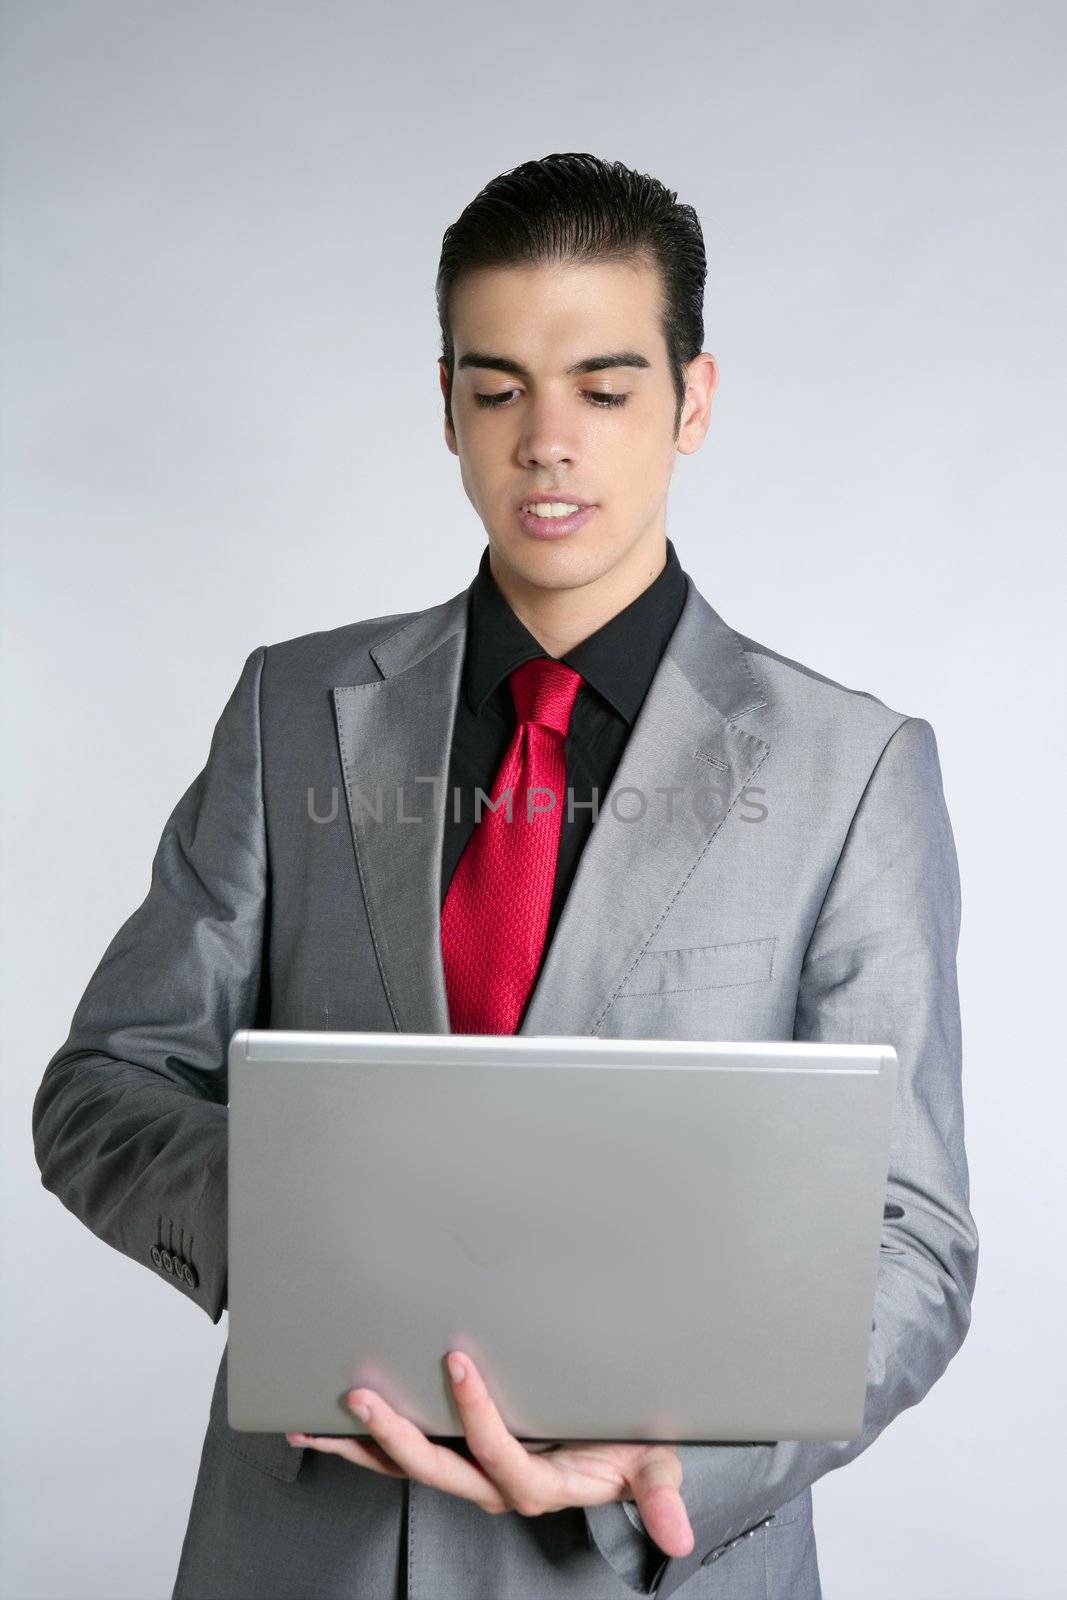 Businessman in gray suit holding laptop computer at studio